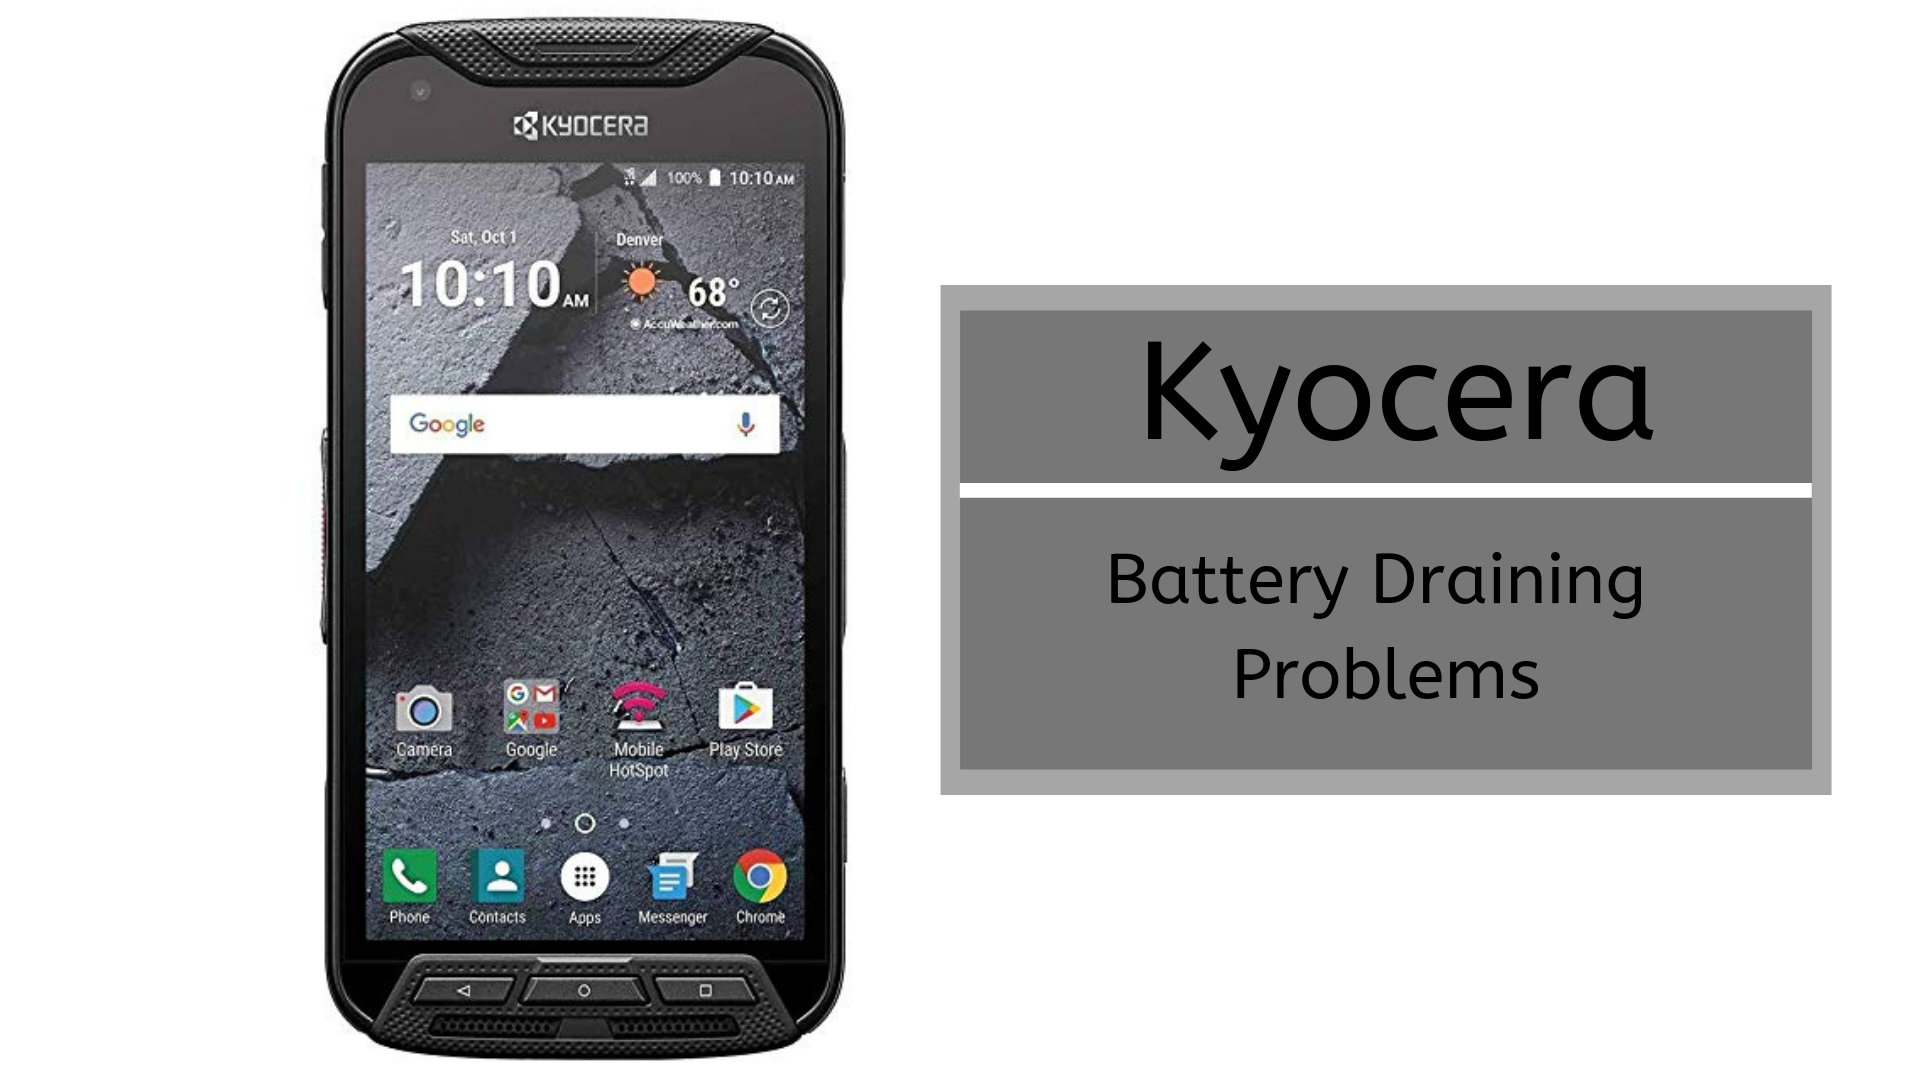 How Fix Kyocera Battery Draining Problems - Troubleshooting and Fixes